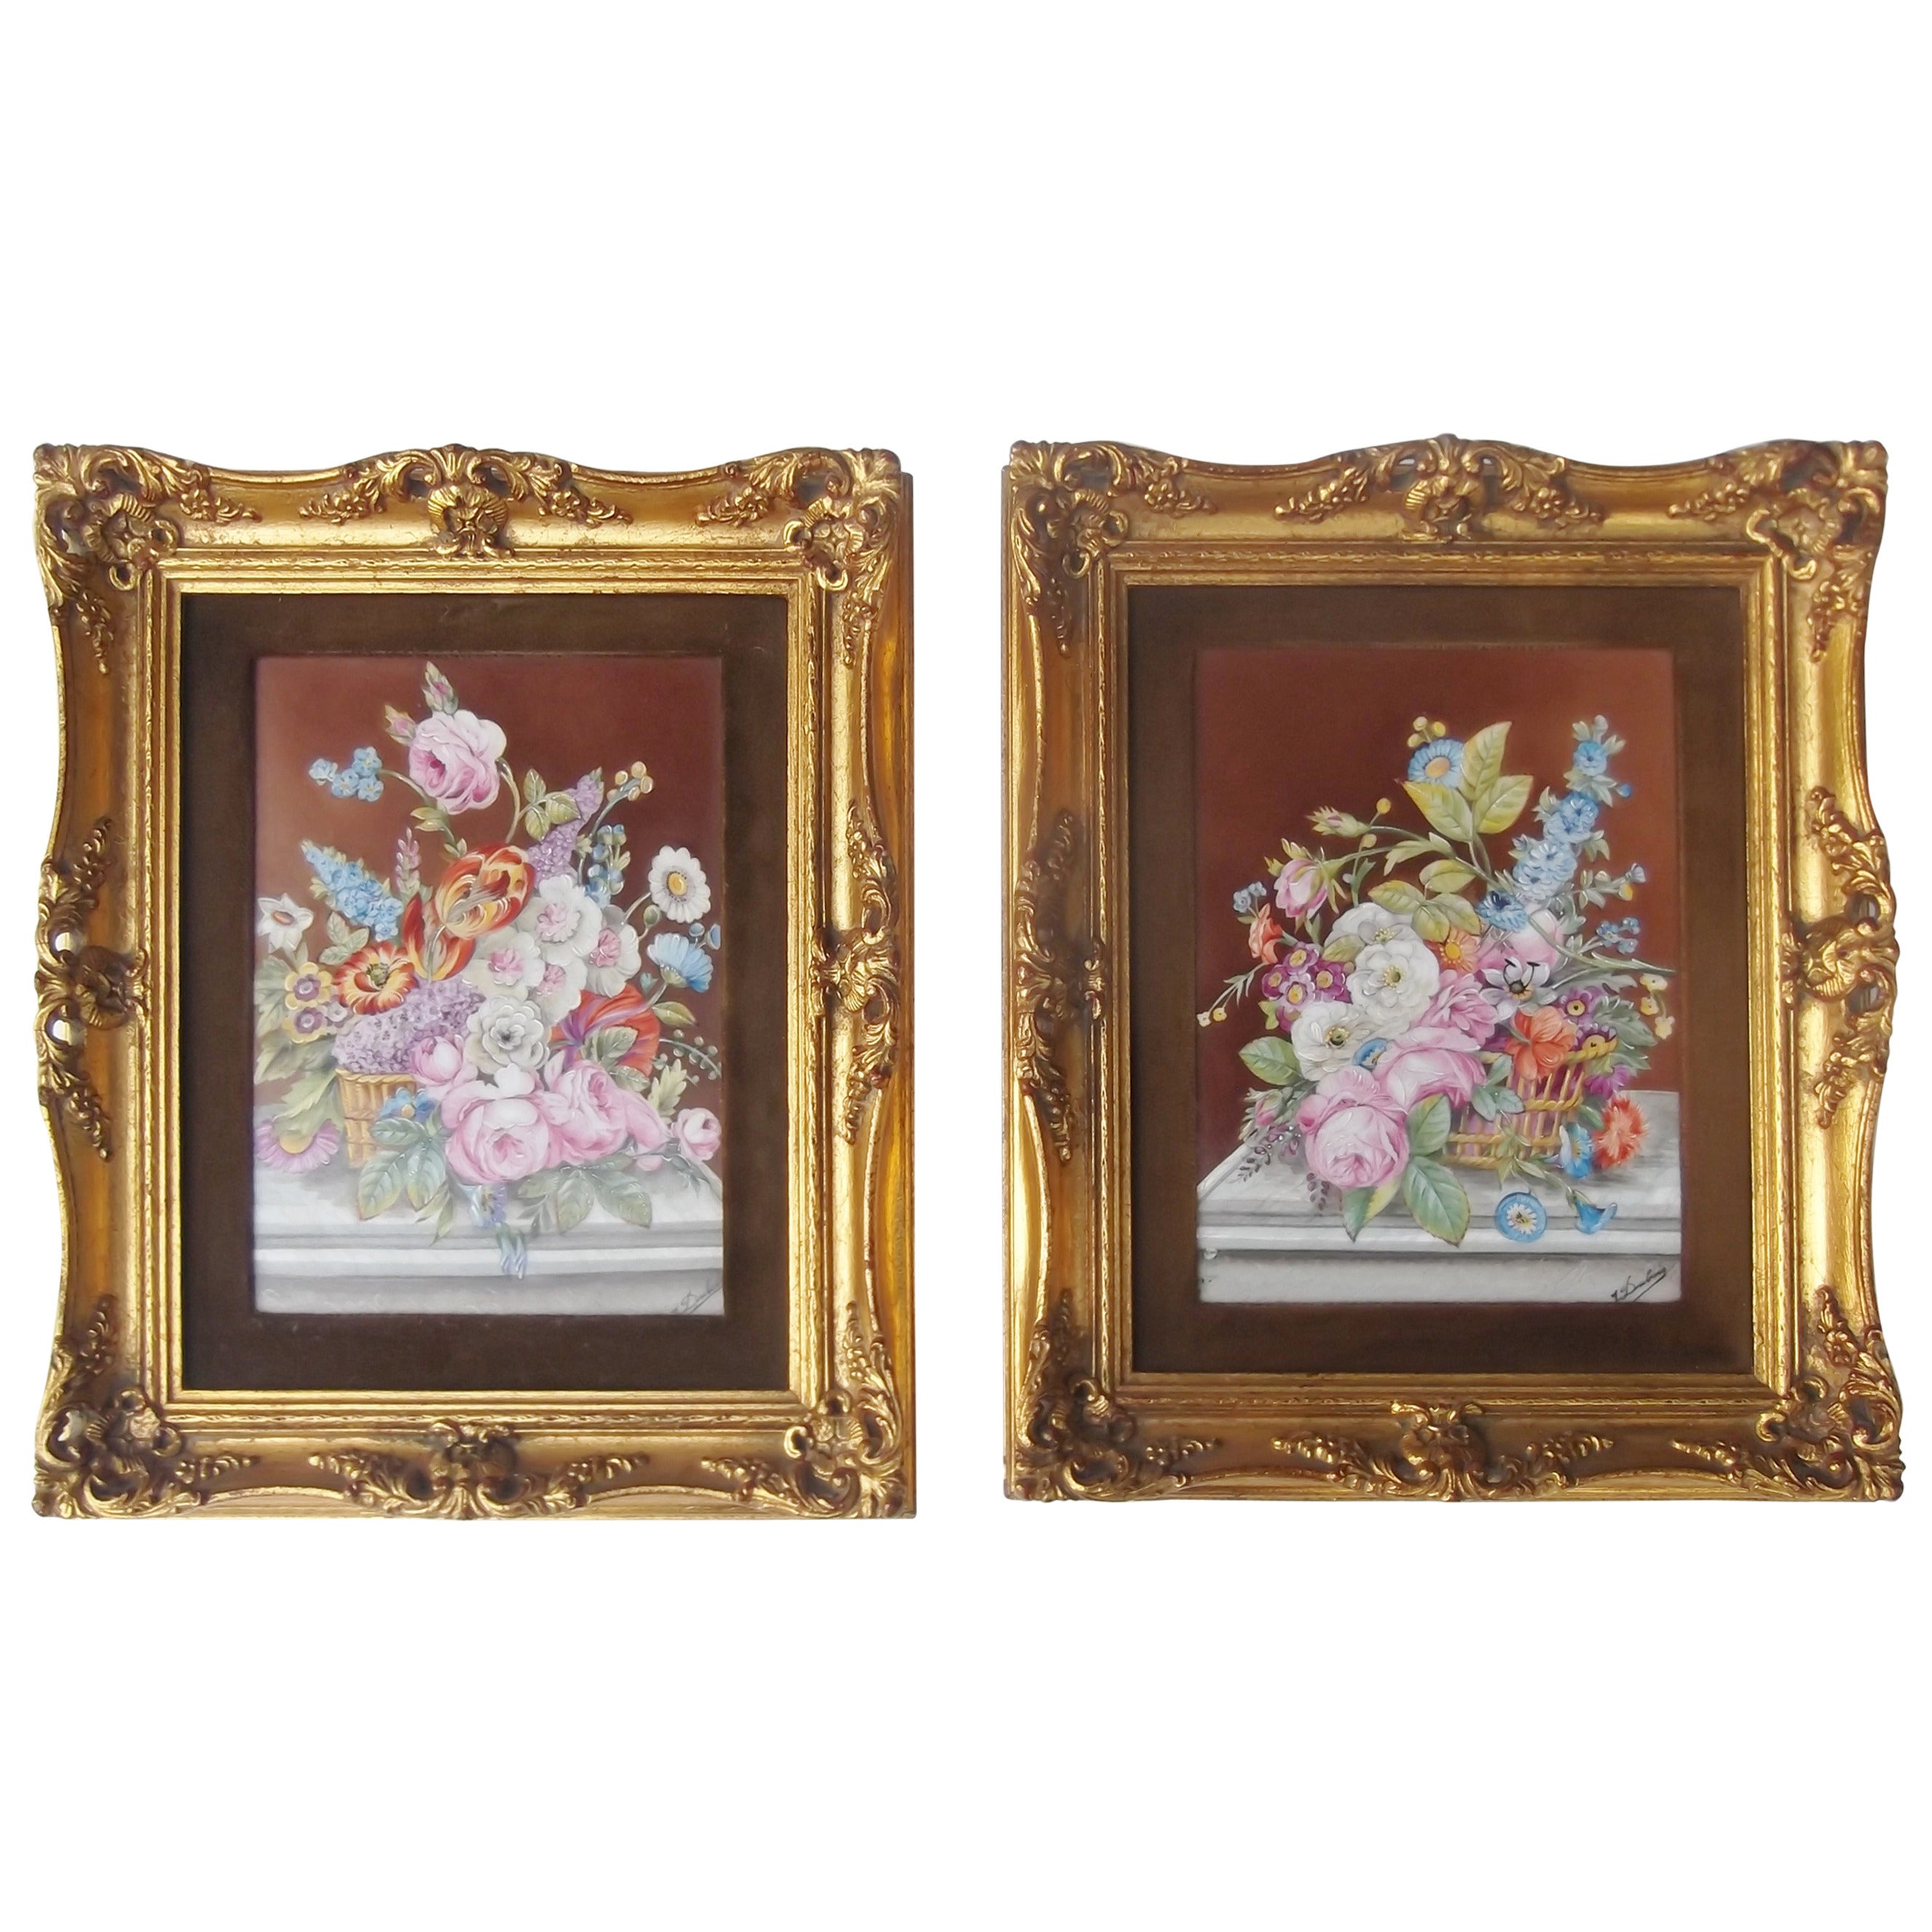 Pair of French Painted Porcelain Framed Plaques